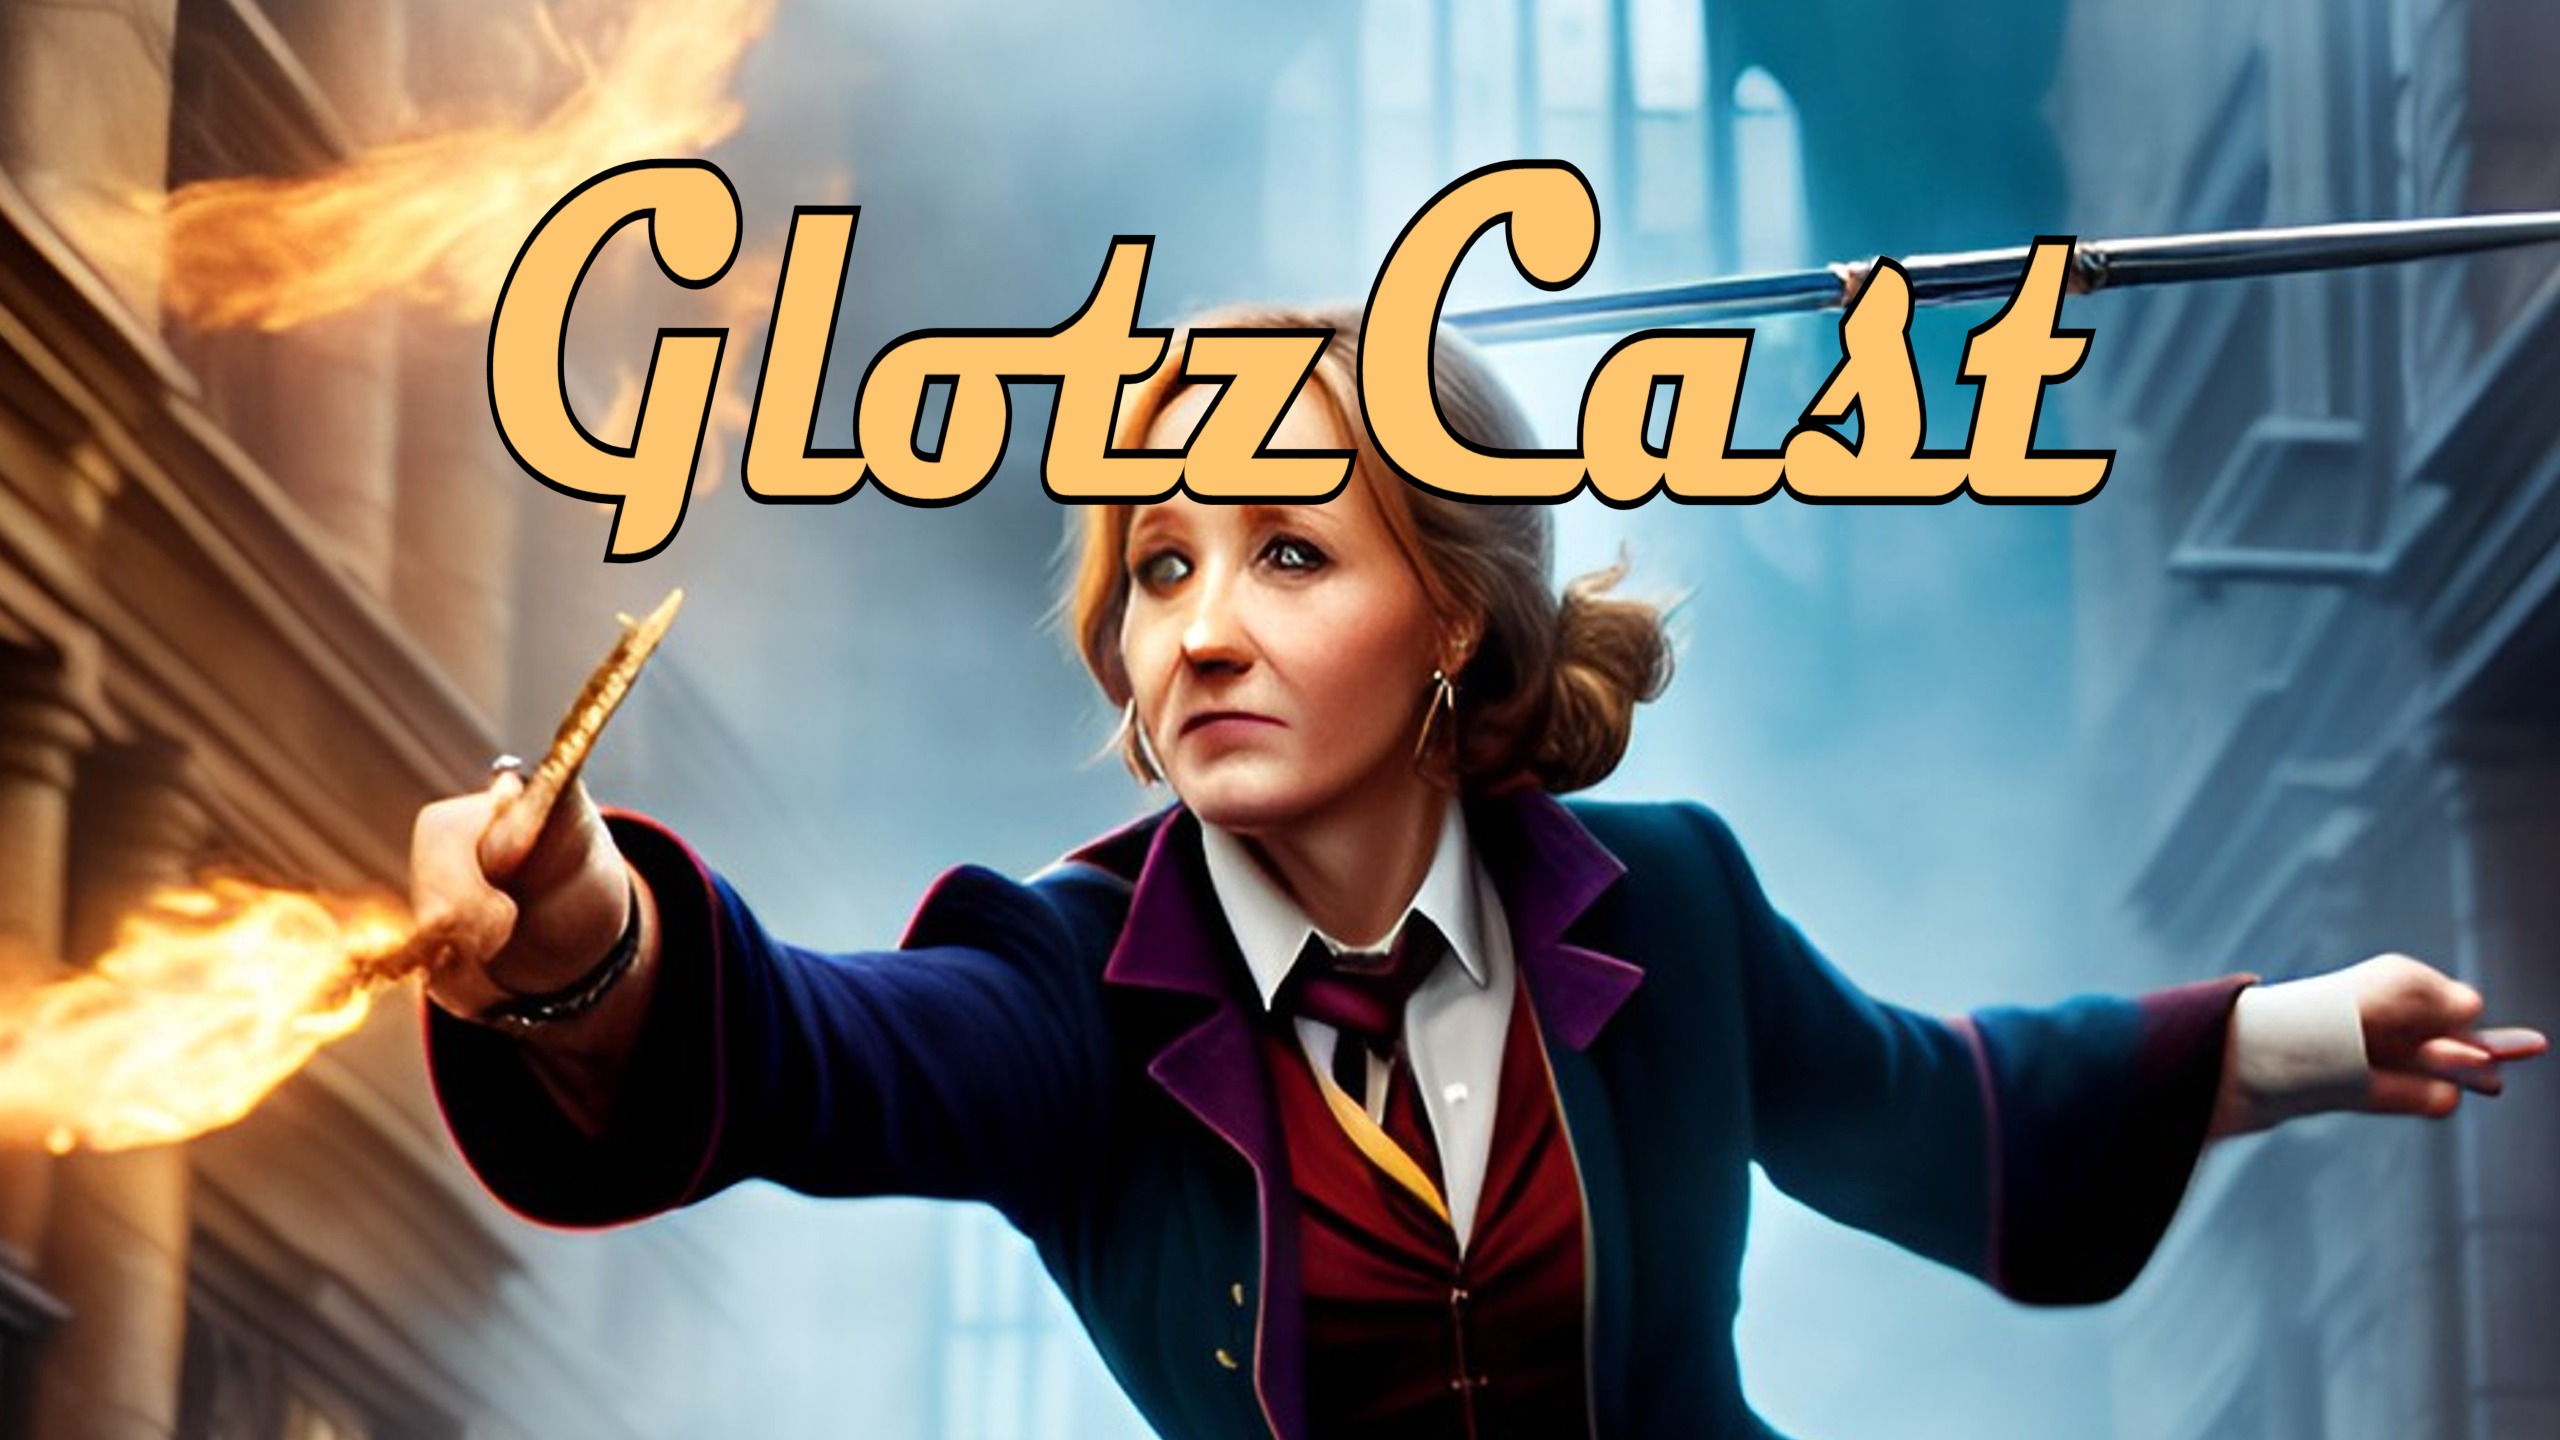 GlotzCast #126 – Knock at the Black Panther: Die gestiefelte J.K. Rowling